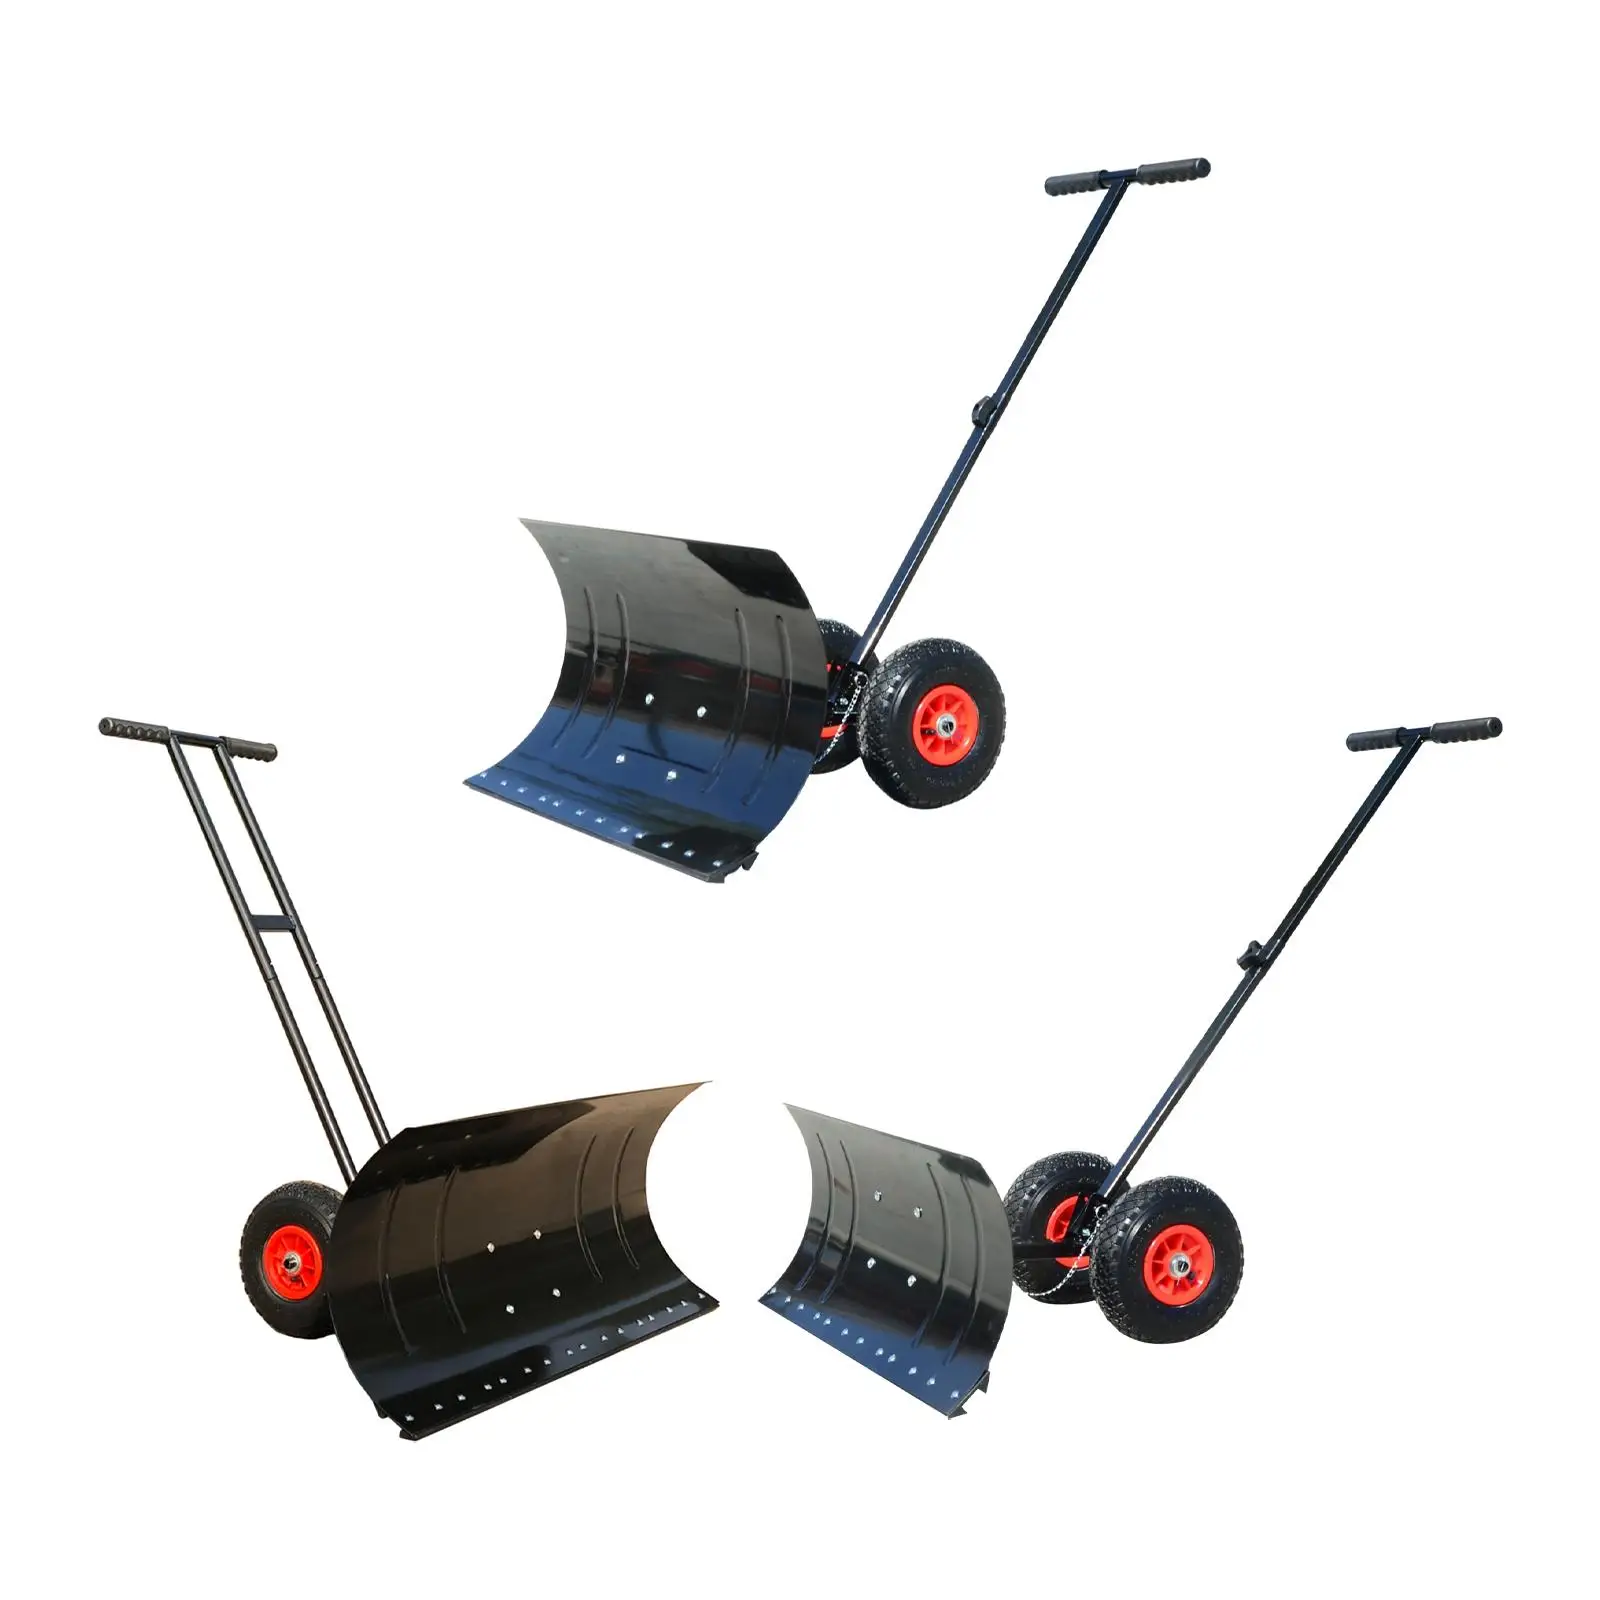 Wheeled Snow Shovel Pusher Outdoor Heavy Duty Portable Adjustable Rolling Removal Tool for Park Pavement Sidewalk Clearing Car